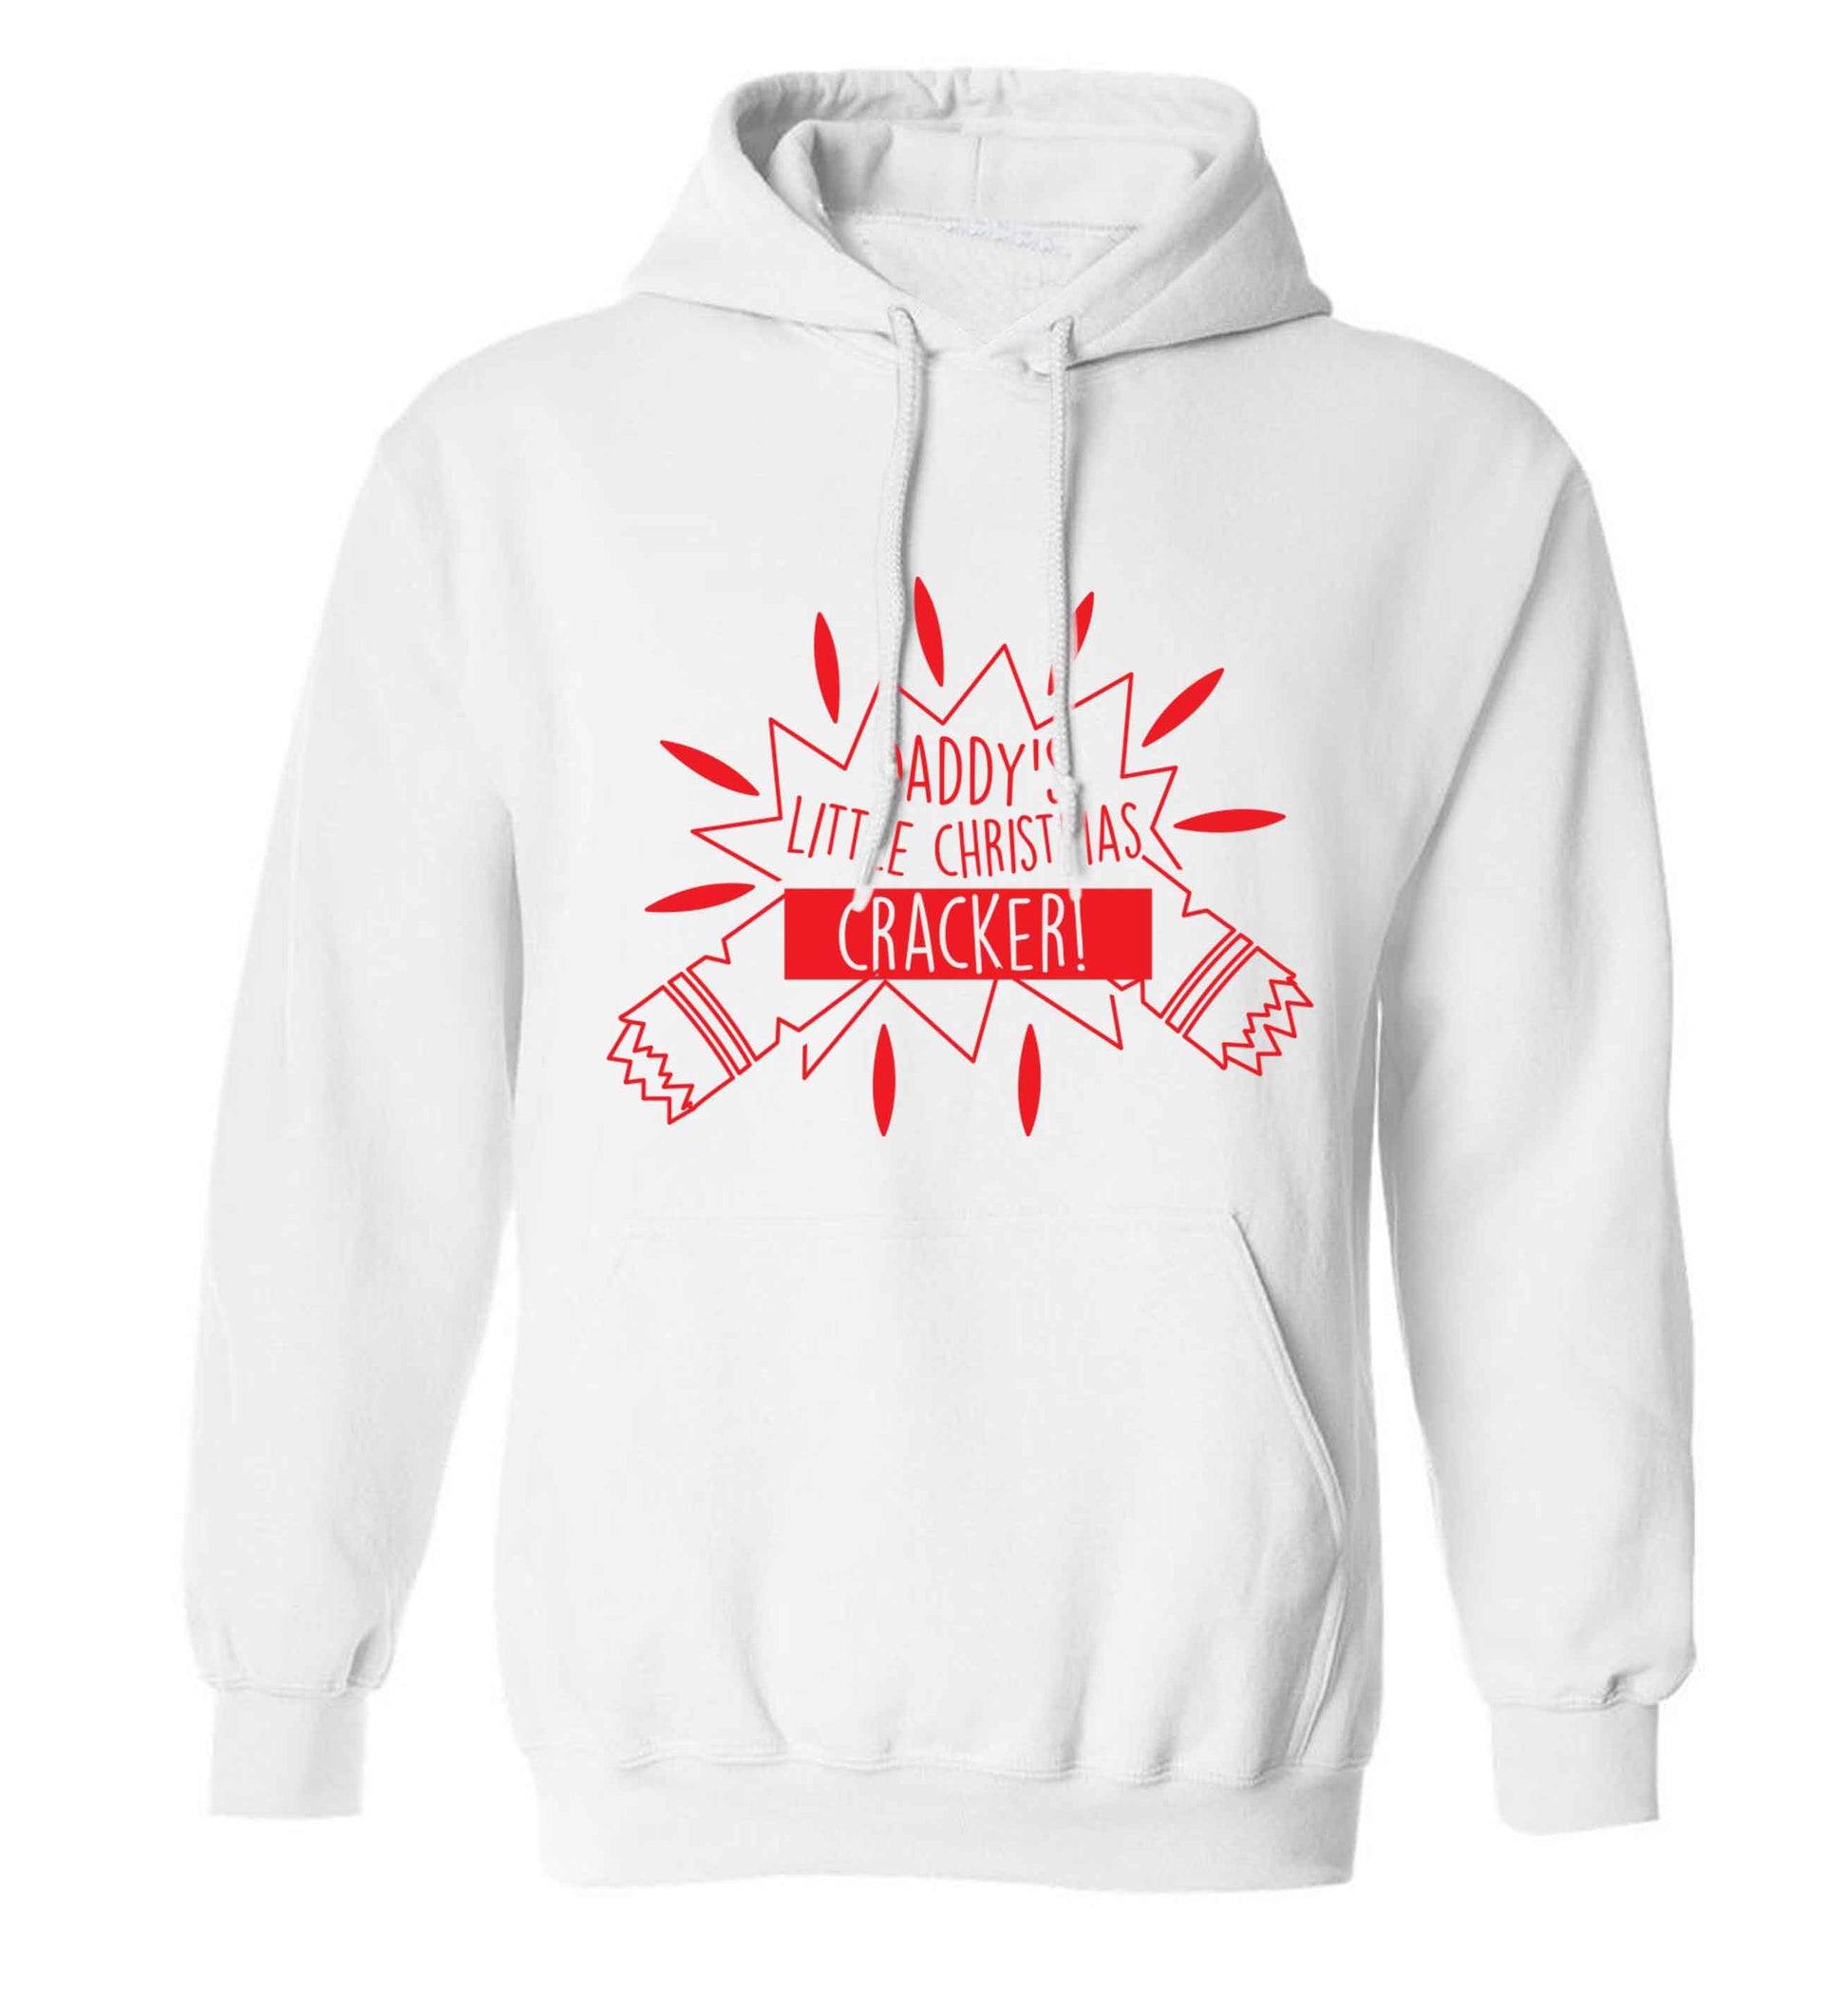 Daddy's little Christmas cracker adults unisex white hoodie 2XL